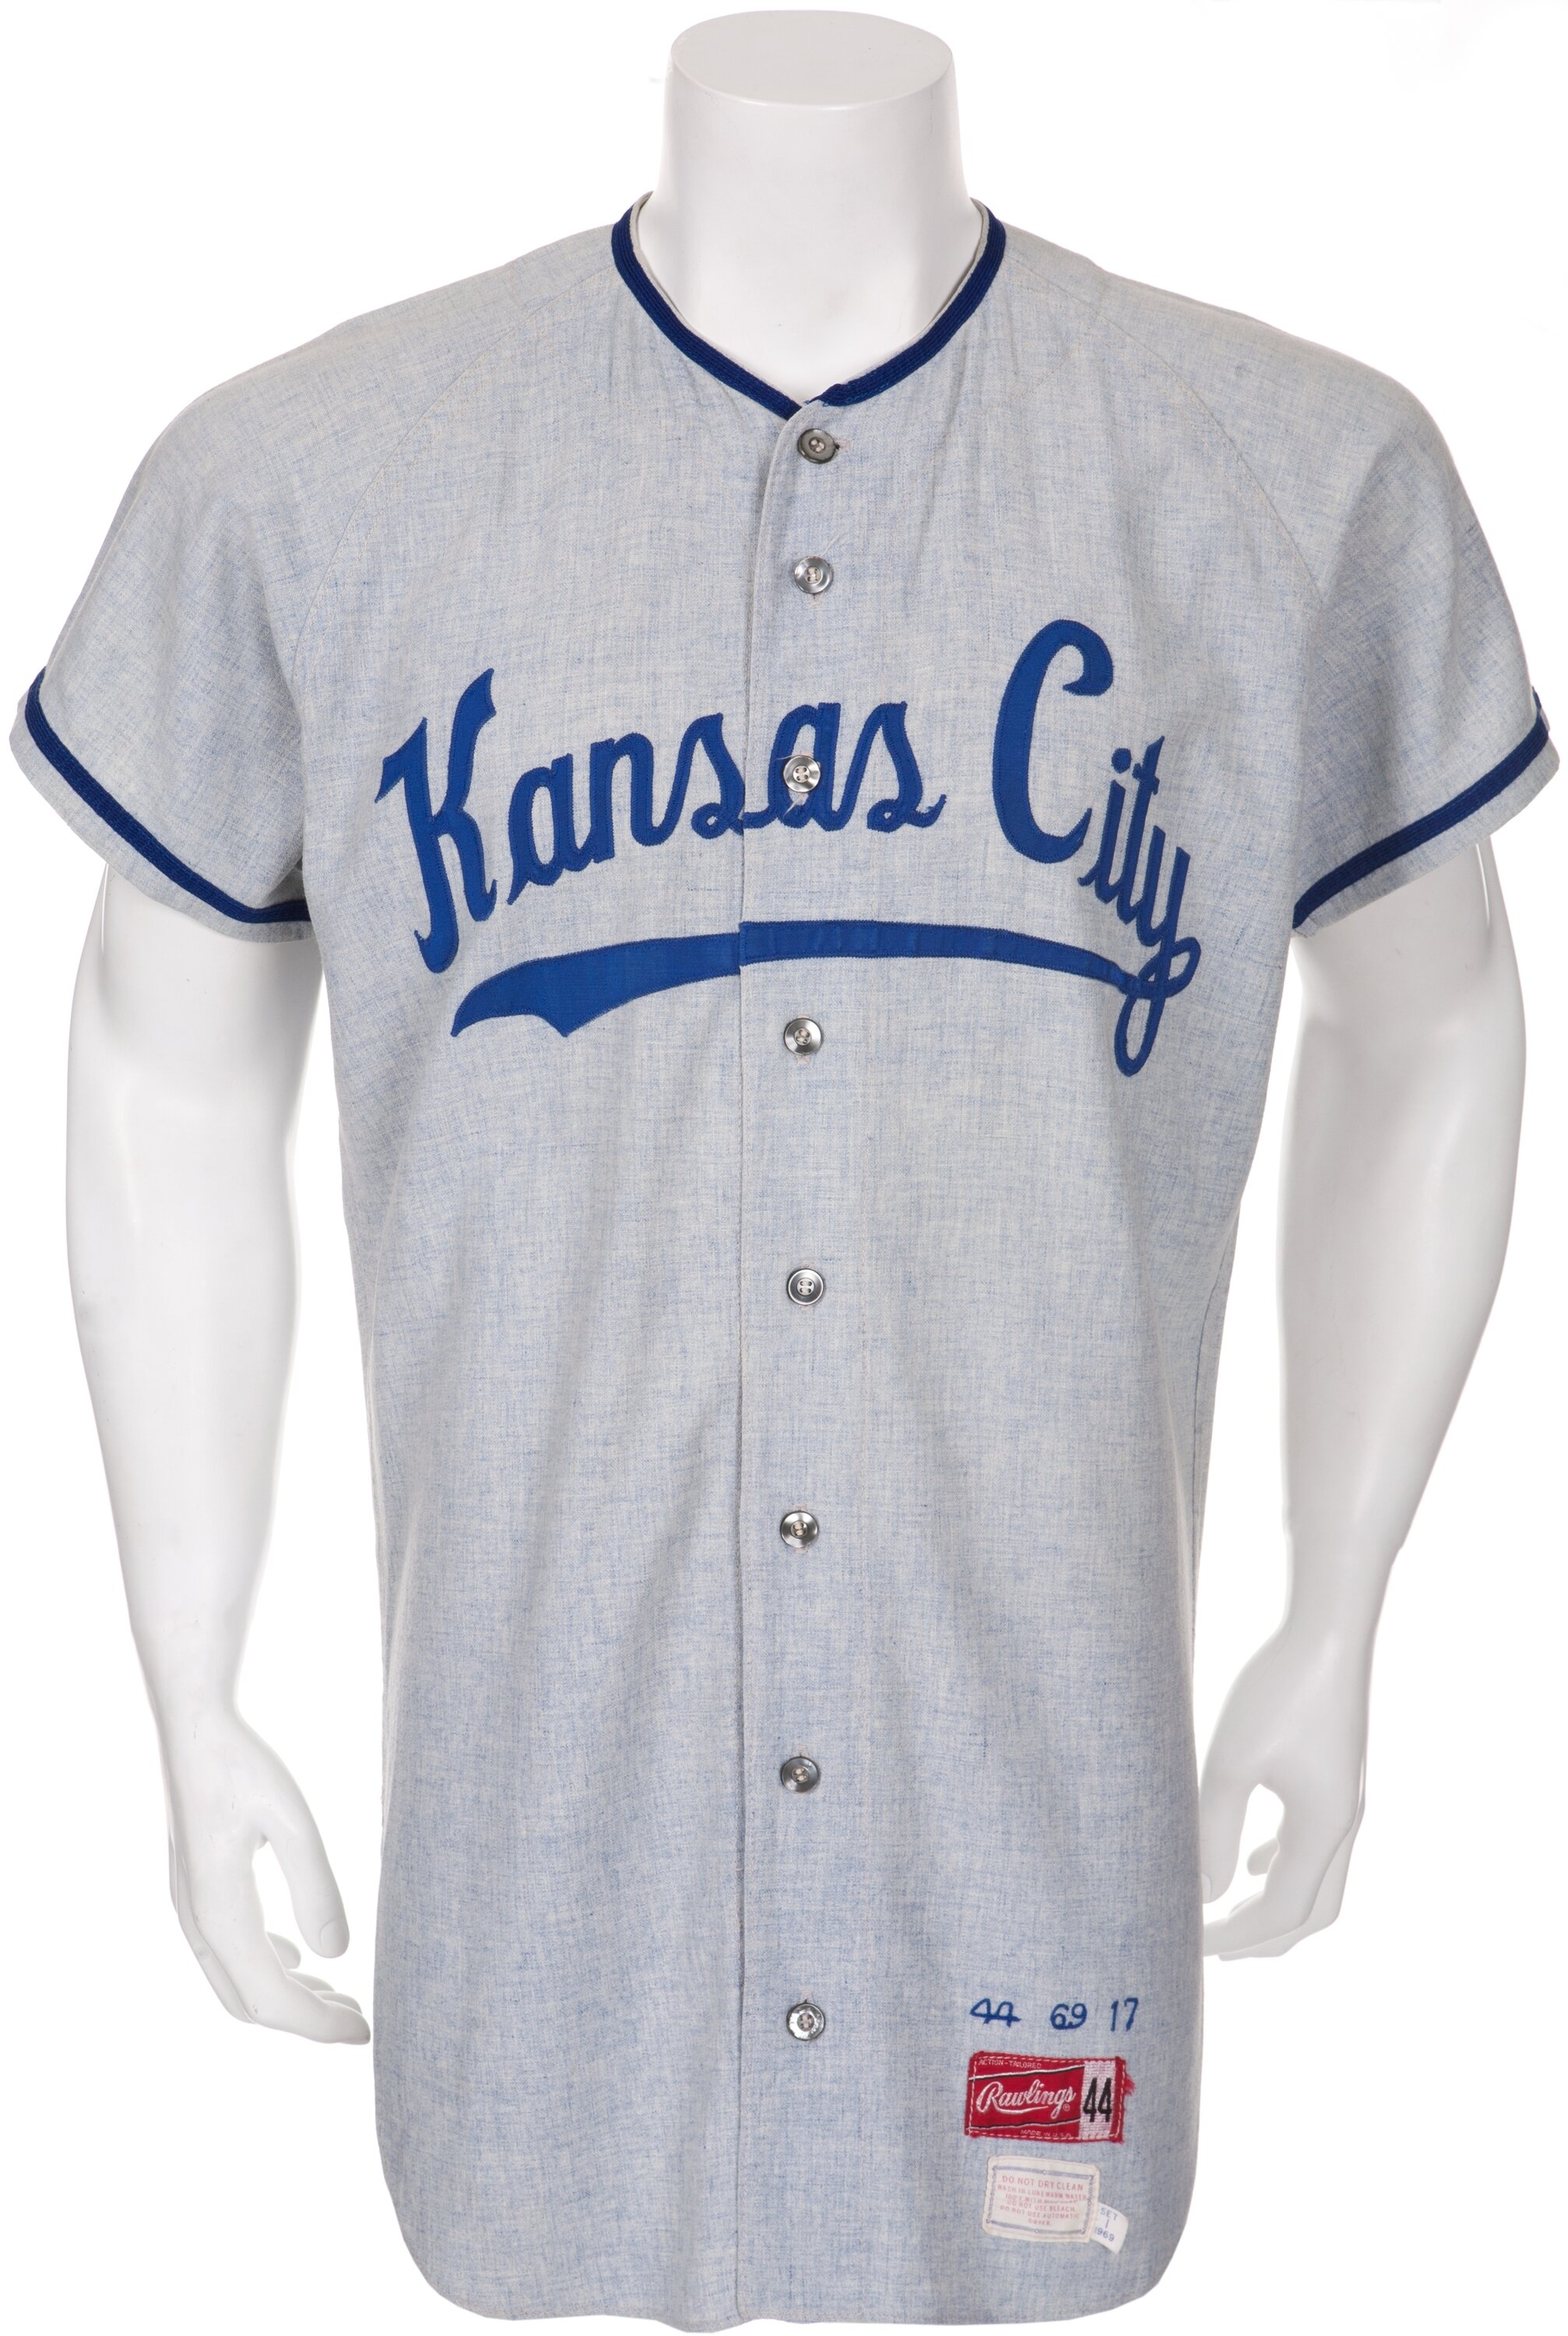 Selling 1996 Kansas City Wiz jersey - would rather I know it goes to a KC  fan directly rather than . From a smoke-free and pet-free home, $50 +  $8 S/H. (remove